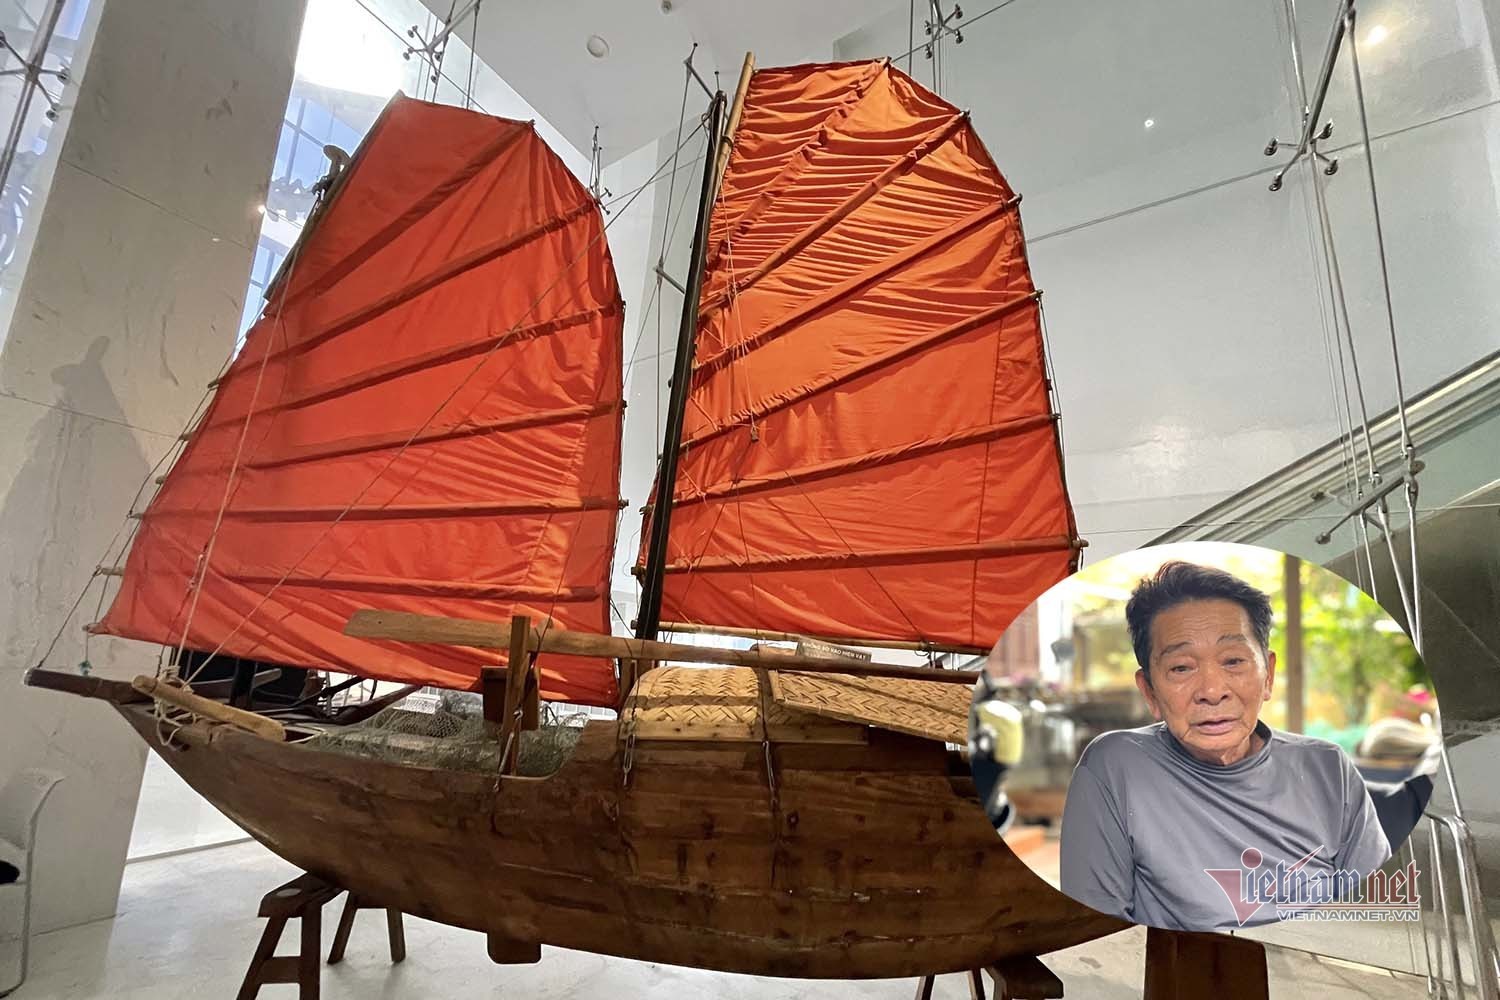 600-year-old craft village makes sailboats that can travel upwind